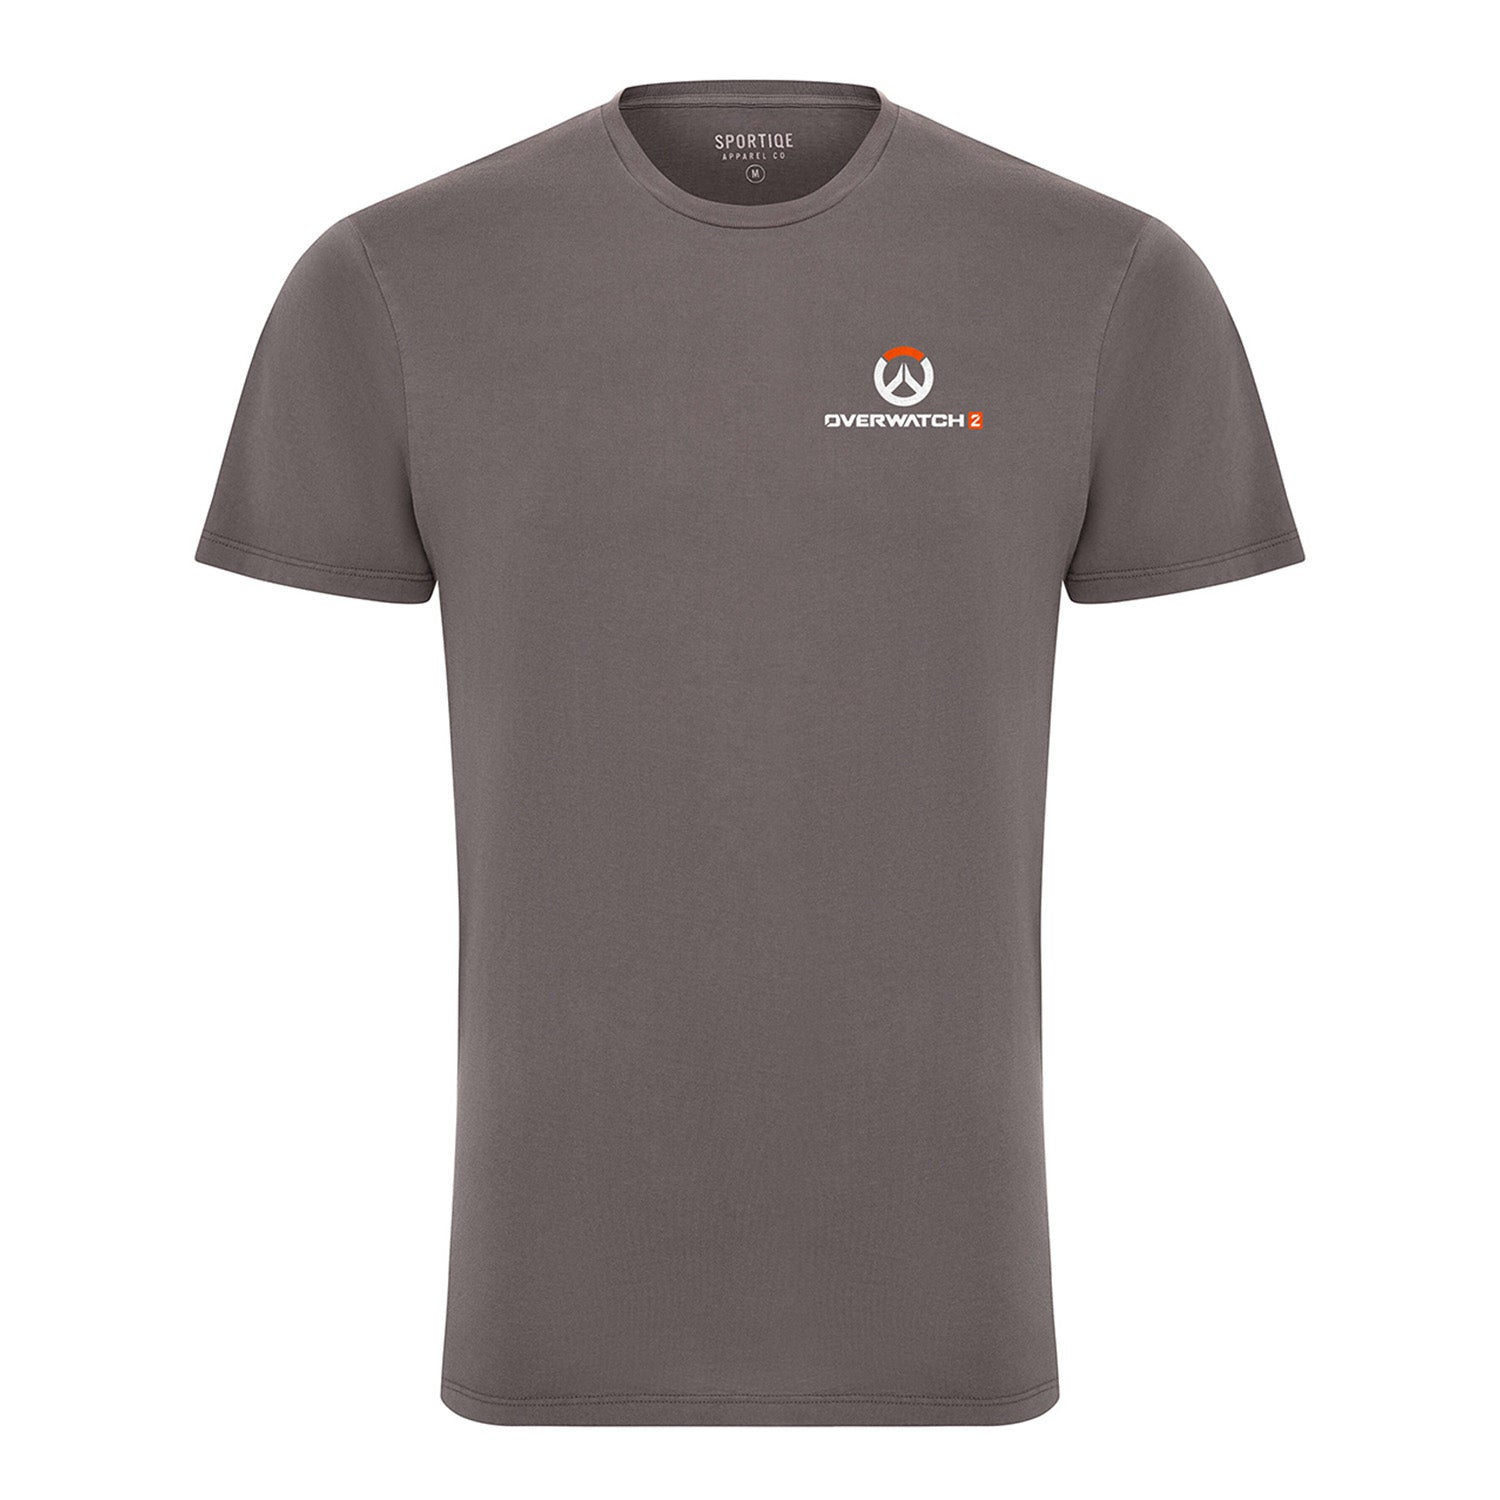 Overwatch 2 Grey Logo T-Shirt - Front View